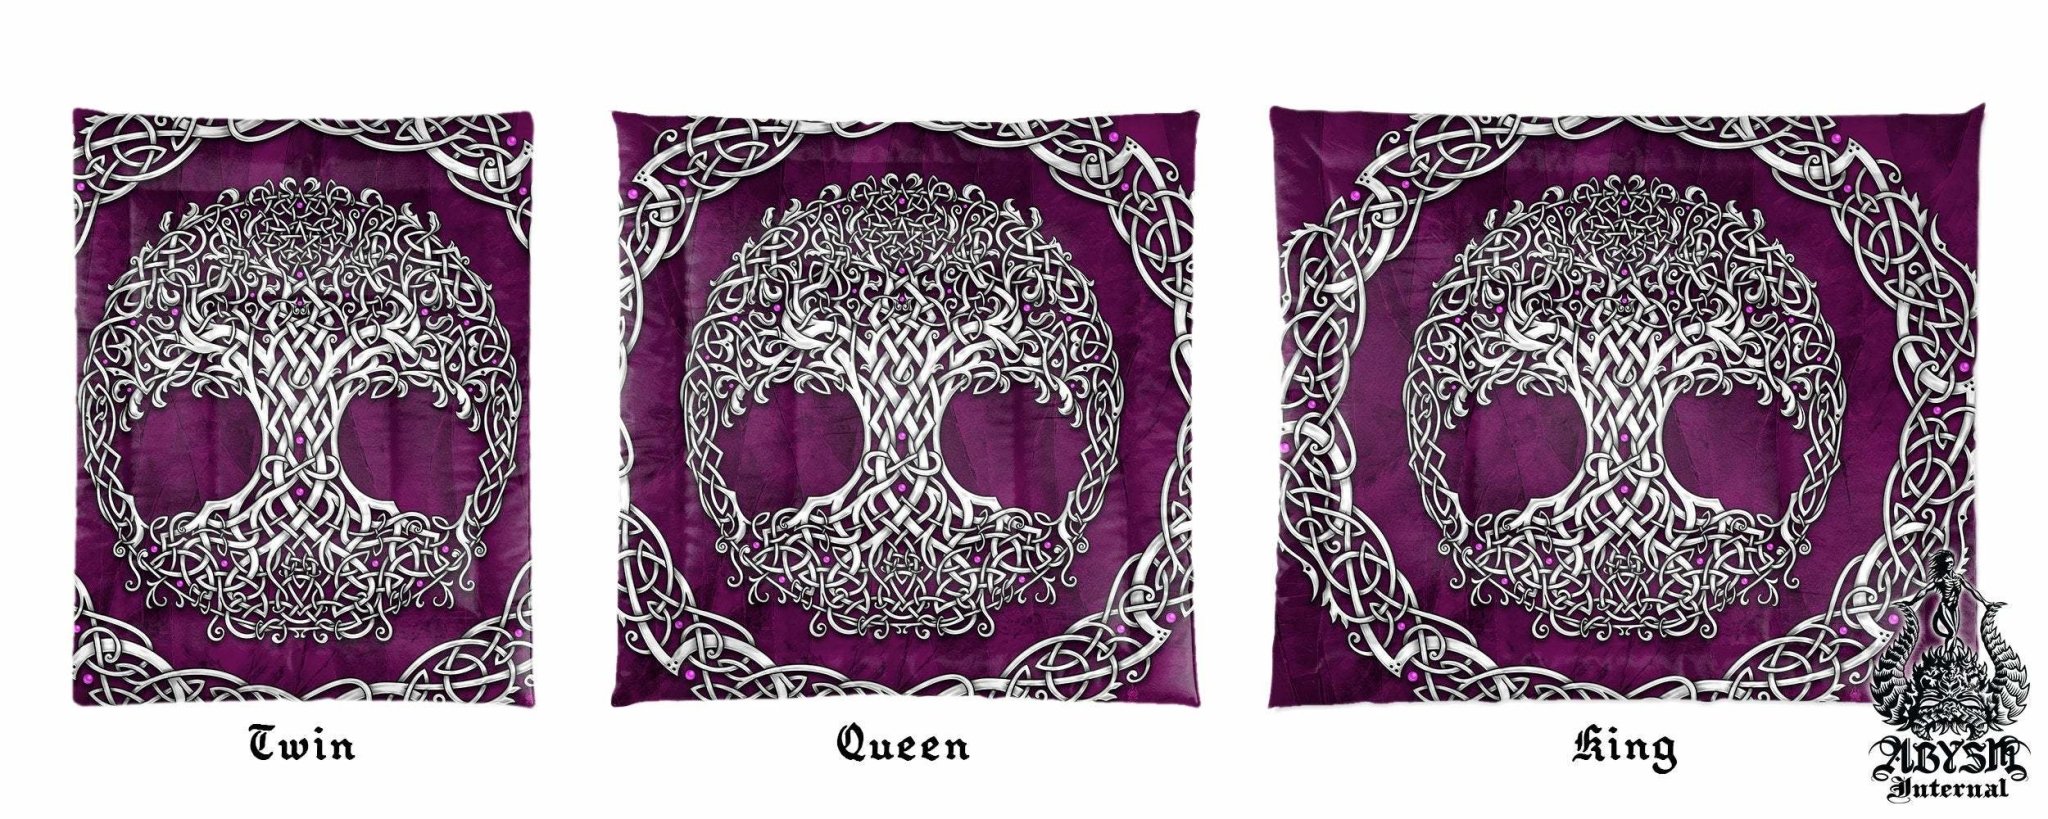 Tree of Life Bedding Set, Comforter and Duvet, Indie Bed Cover, Witchy Bedroom Decor King, Queen and Twin Size - Celtic, White and Purple - Abysm Internal